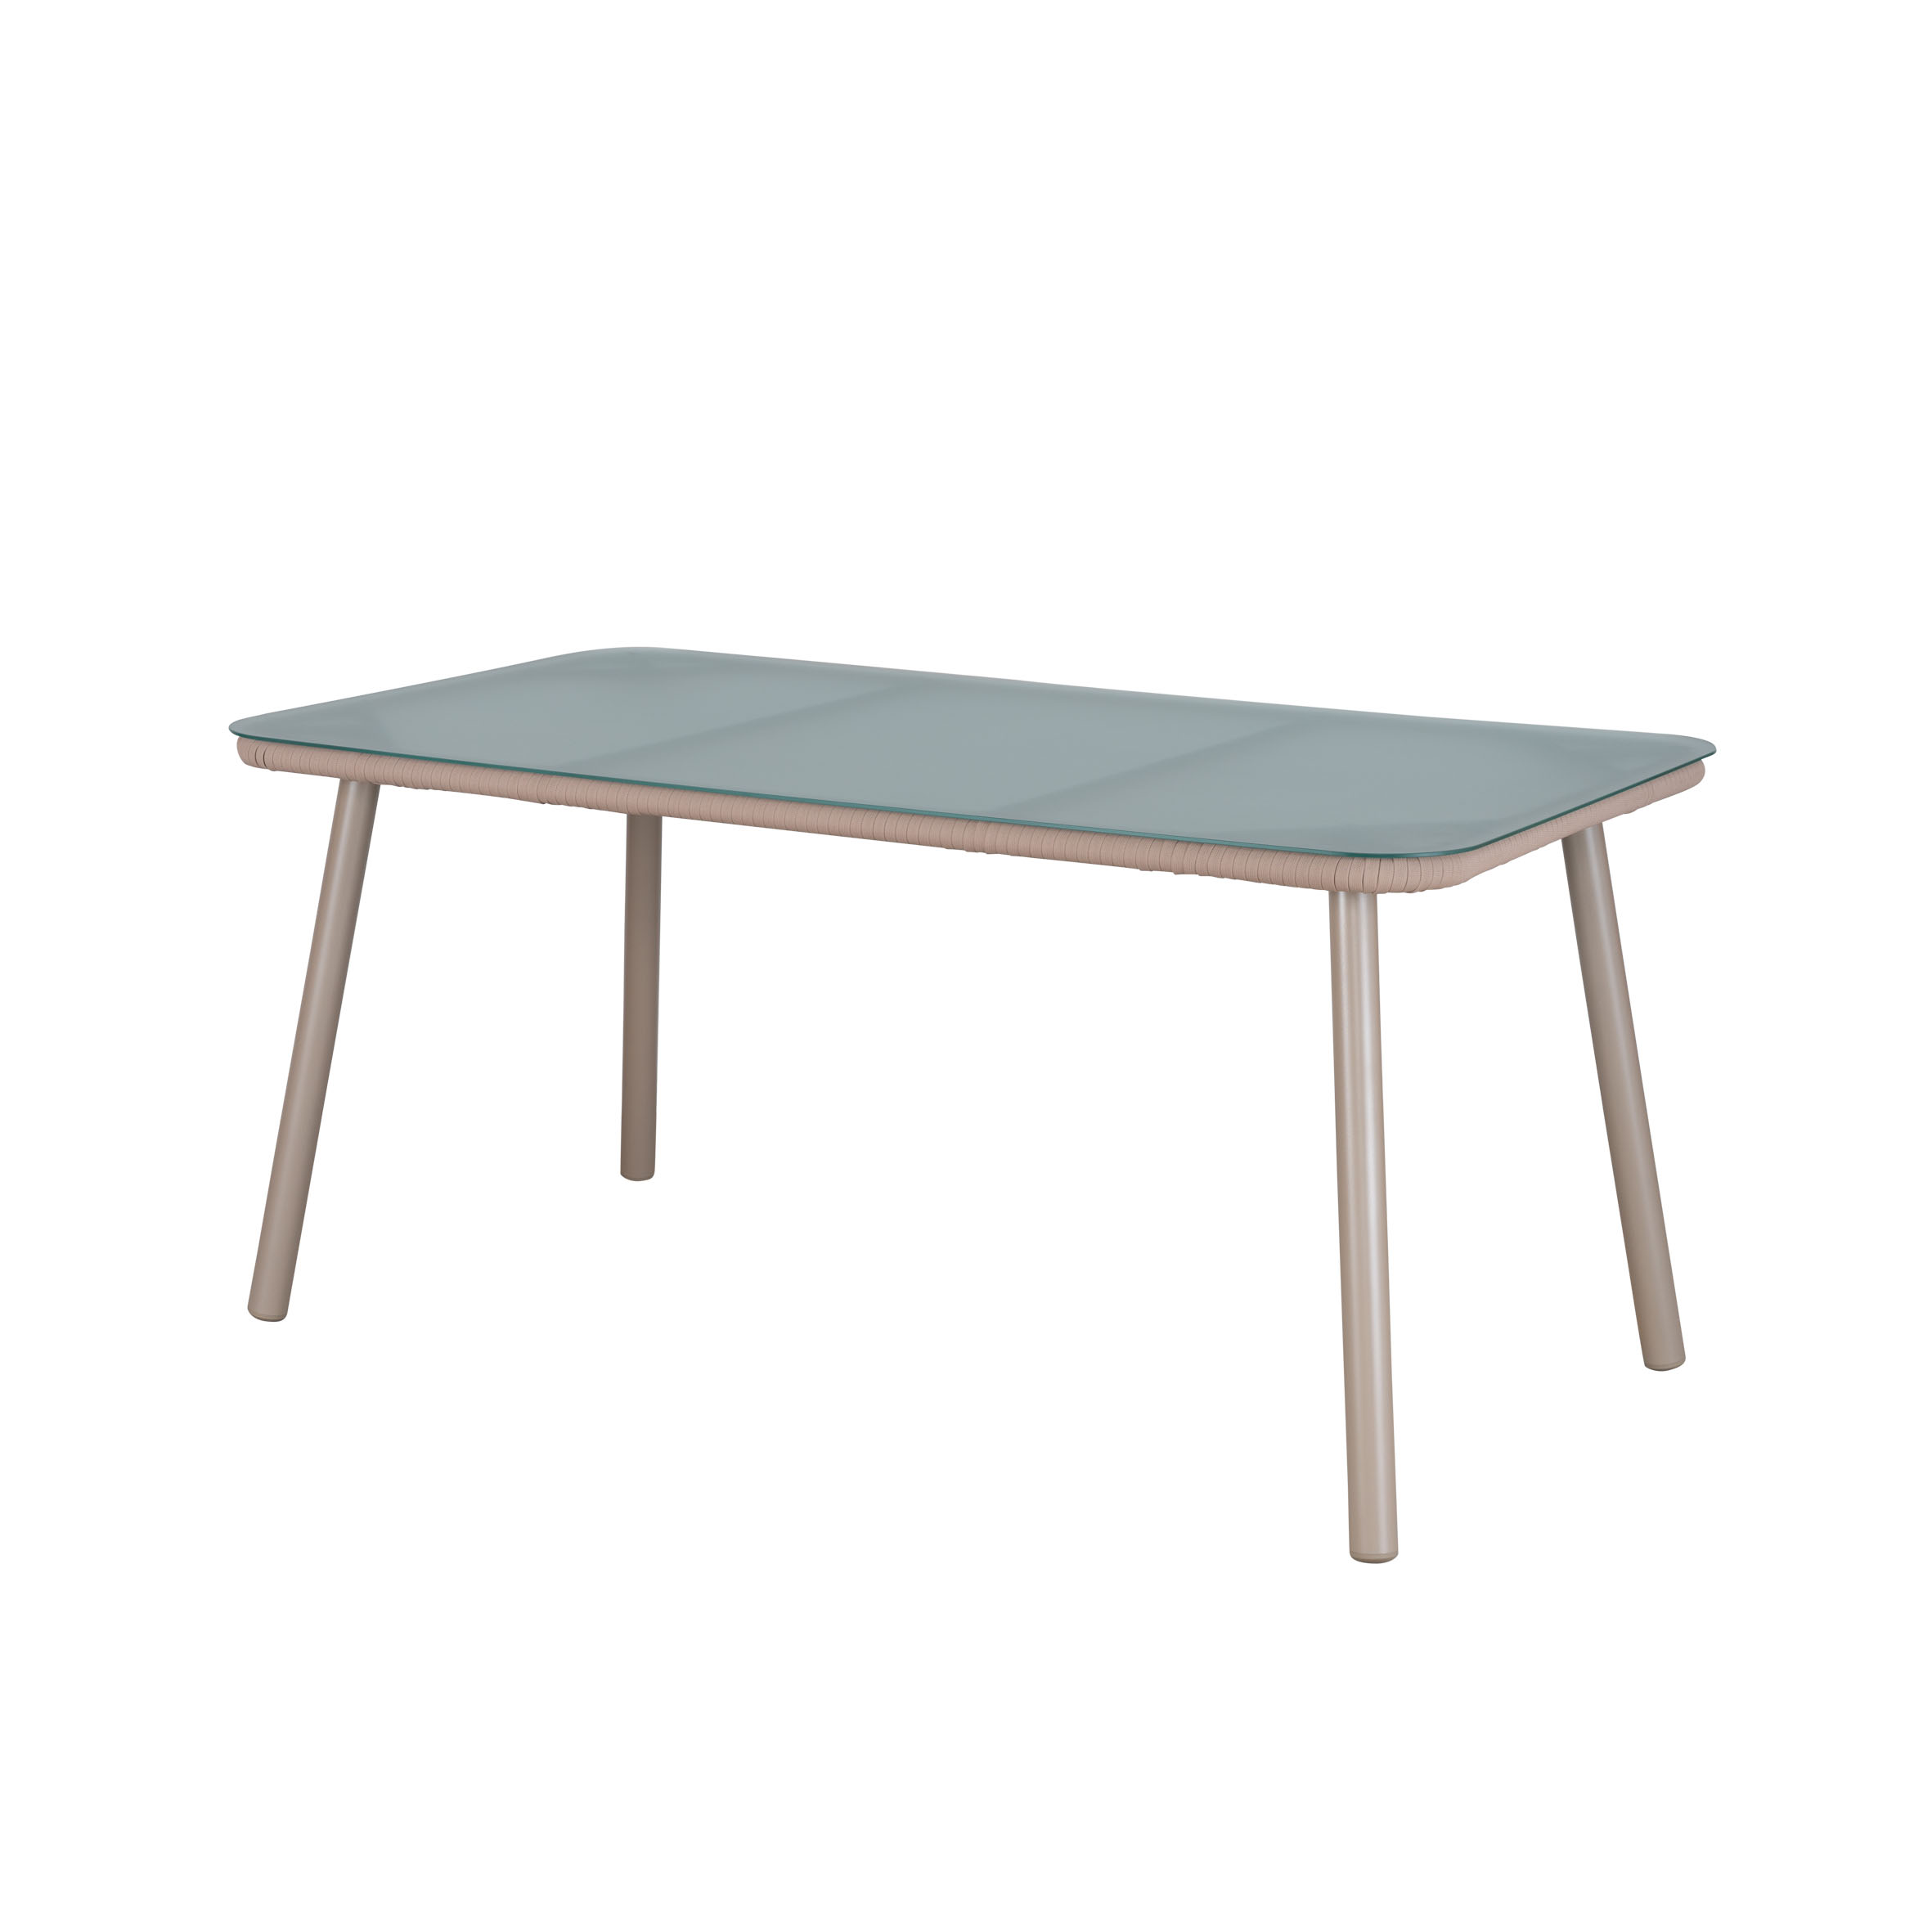 Lincoln rope rectangle table S8